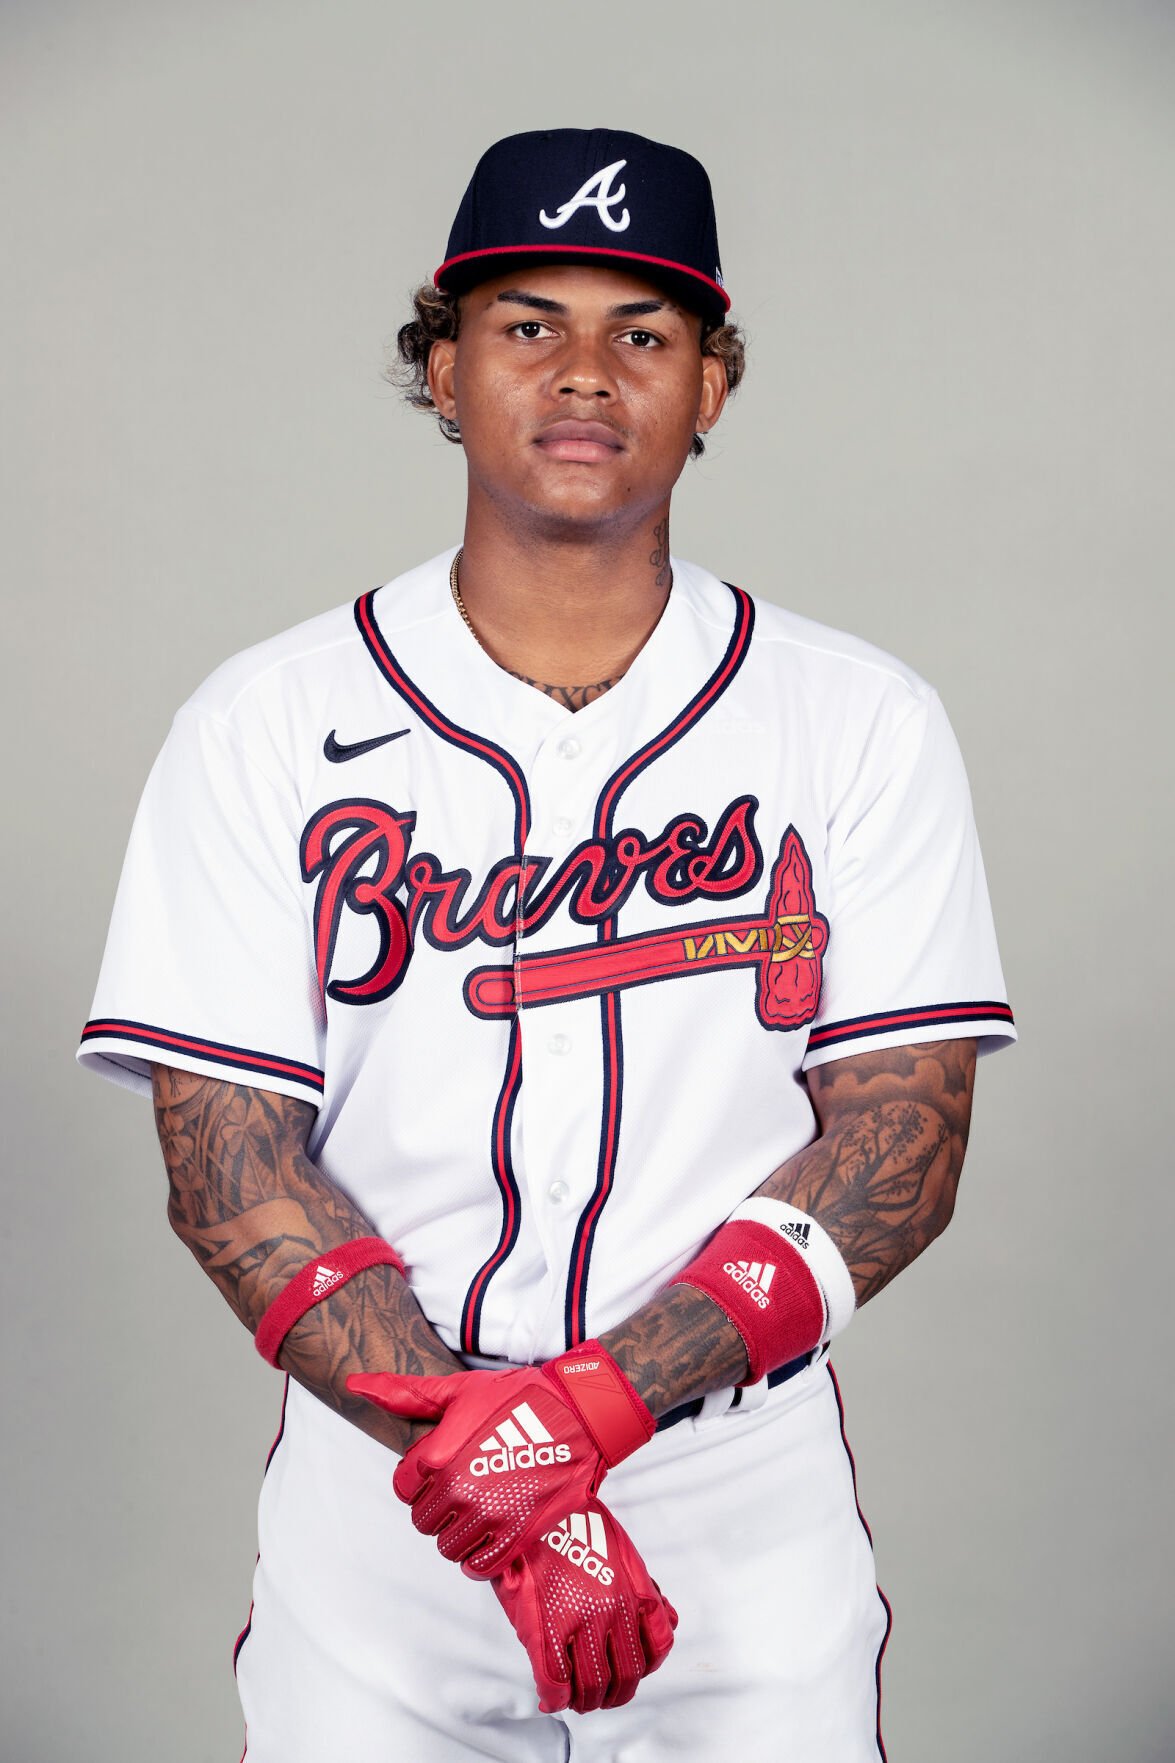 Braves slugger Soler sidelined with COVID; Pache added as replacement, Atlantabraves